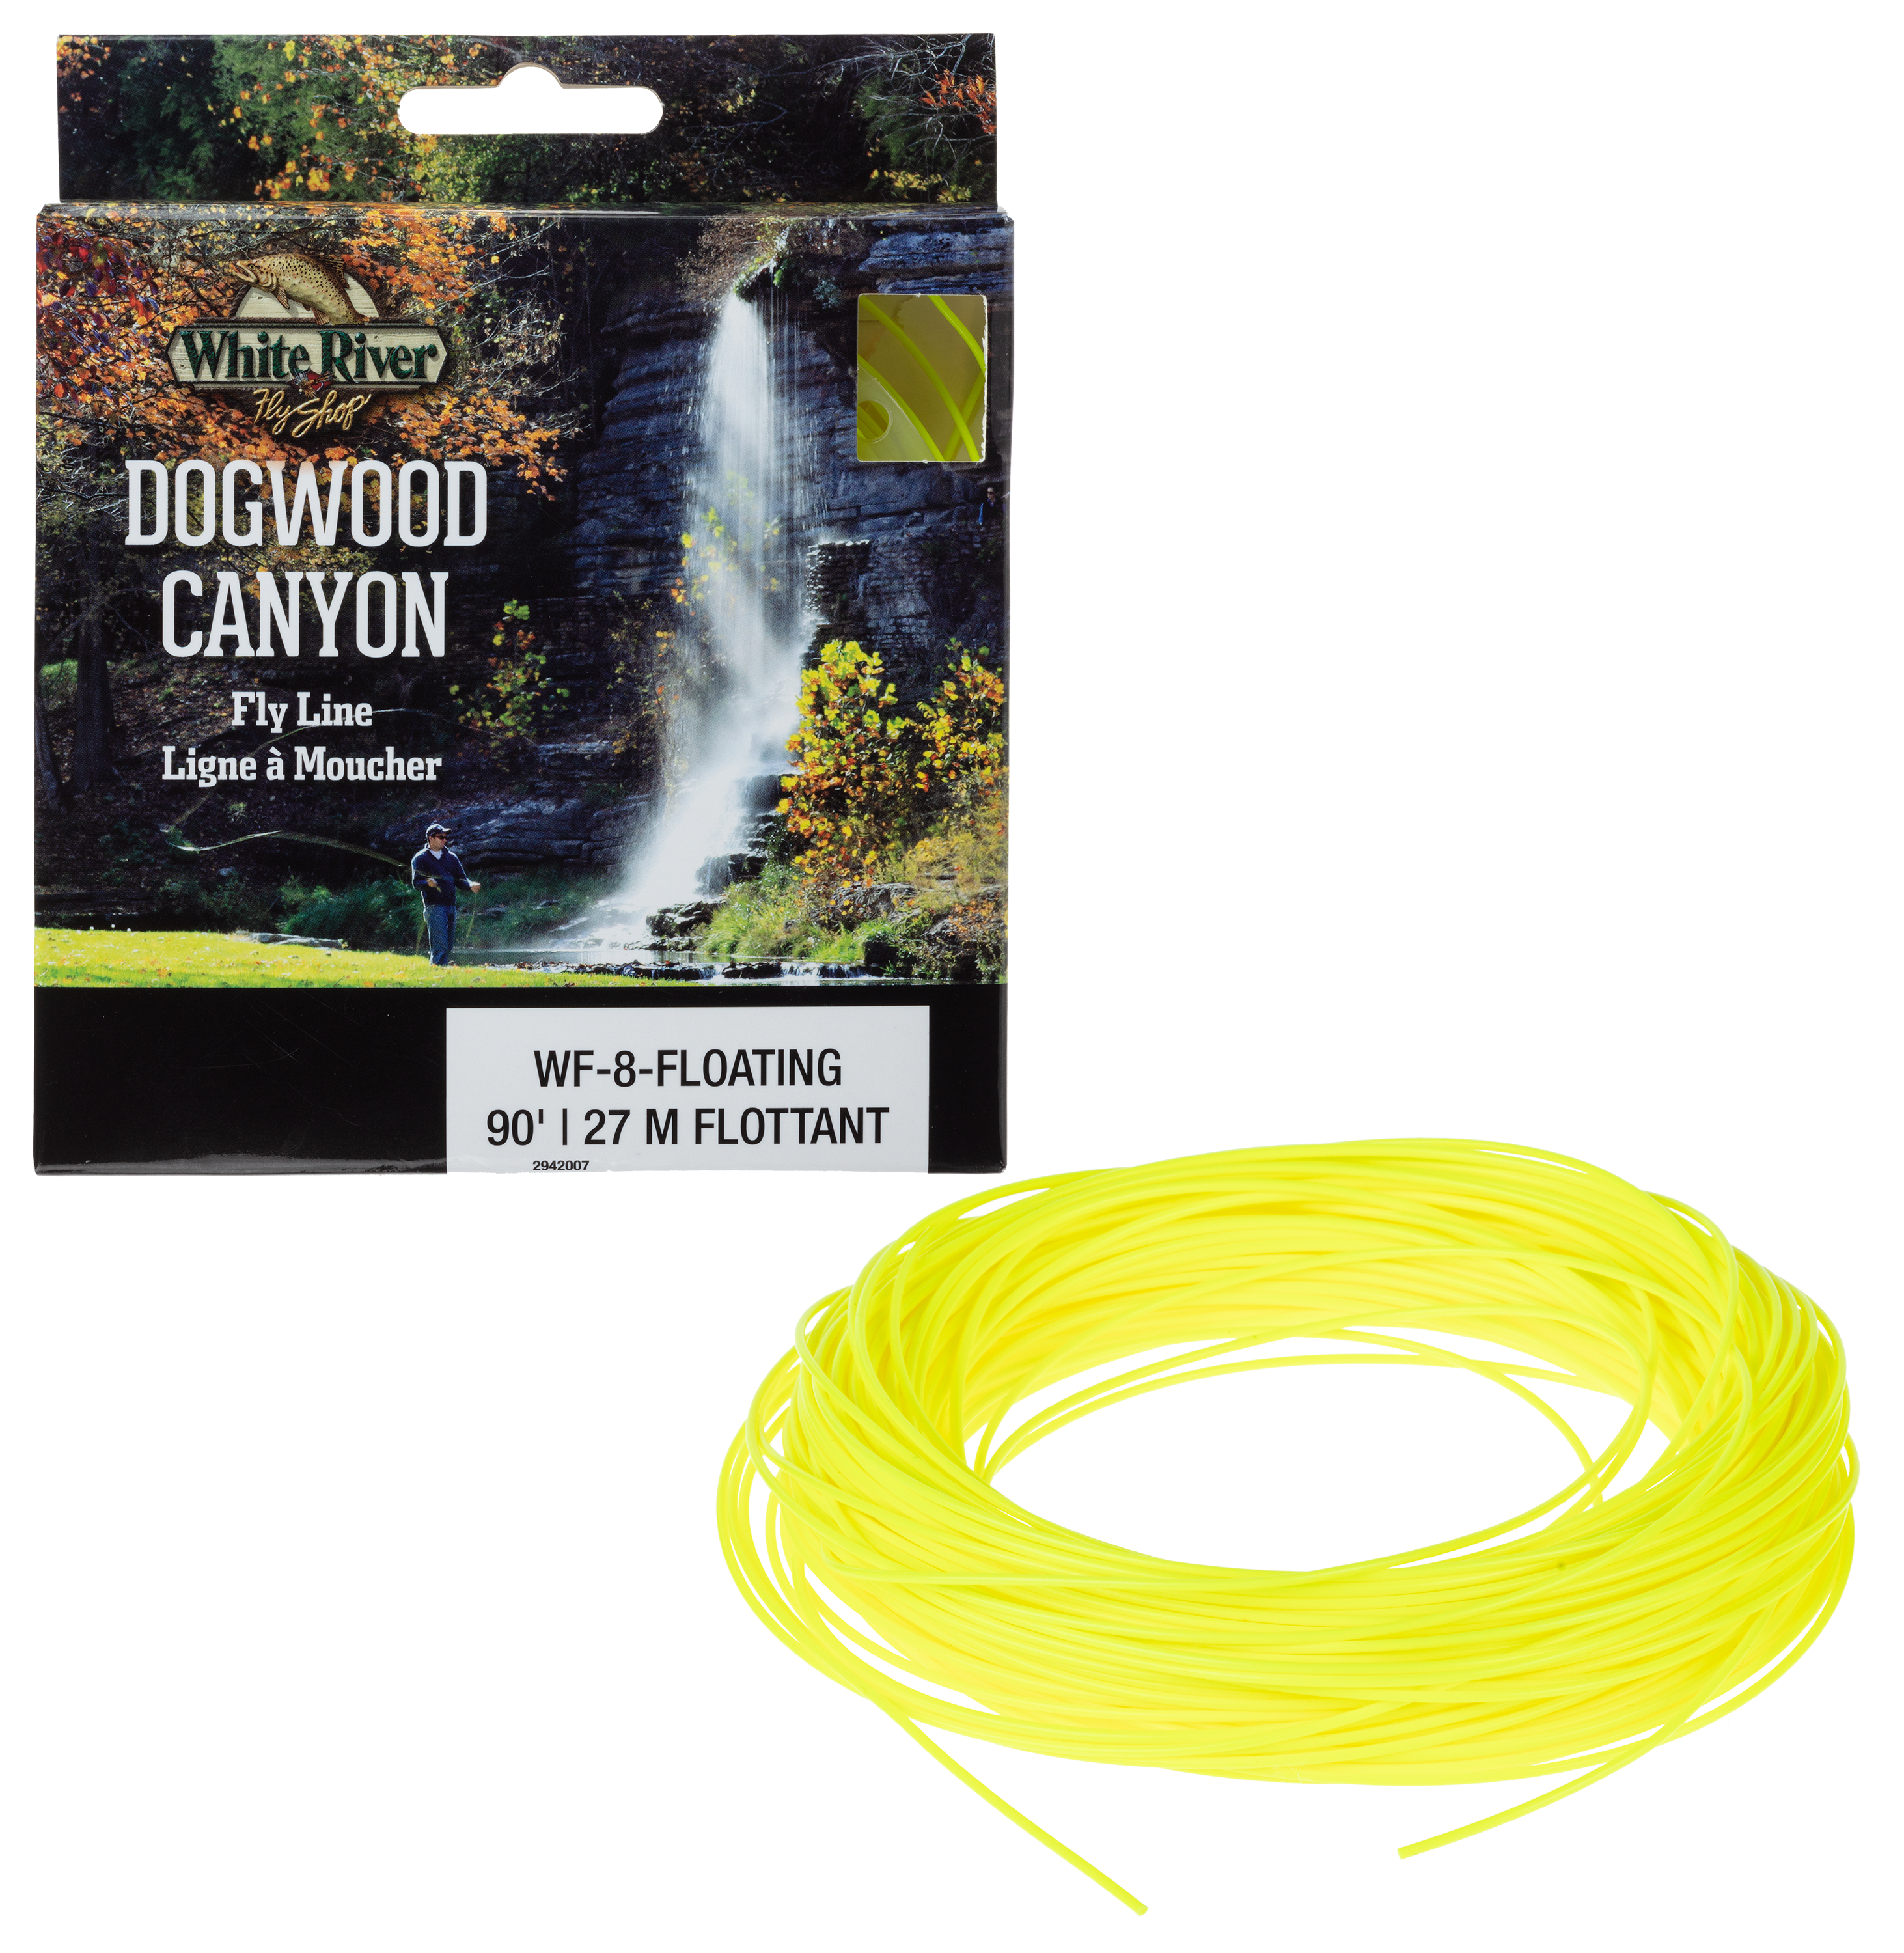 White River Fly Shop Dogwood Canyon Floating Fly Line - 5